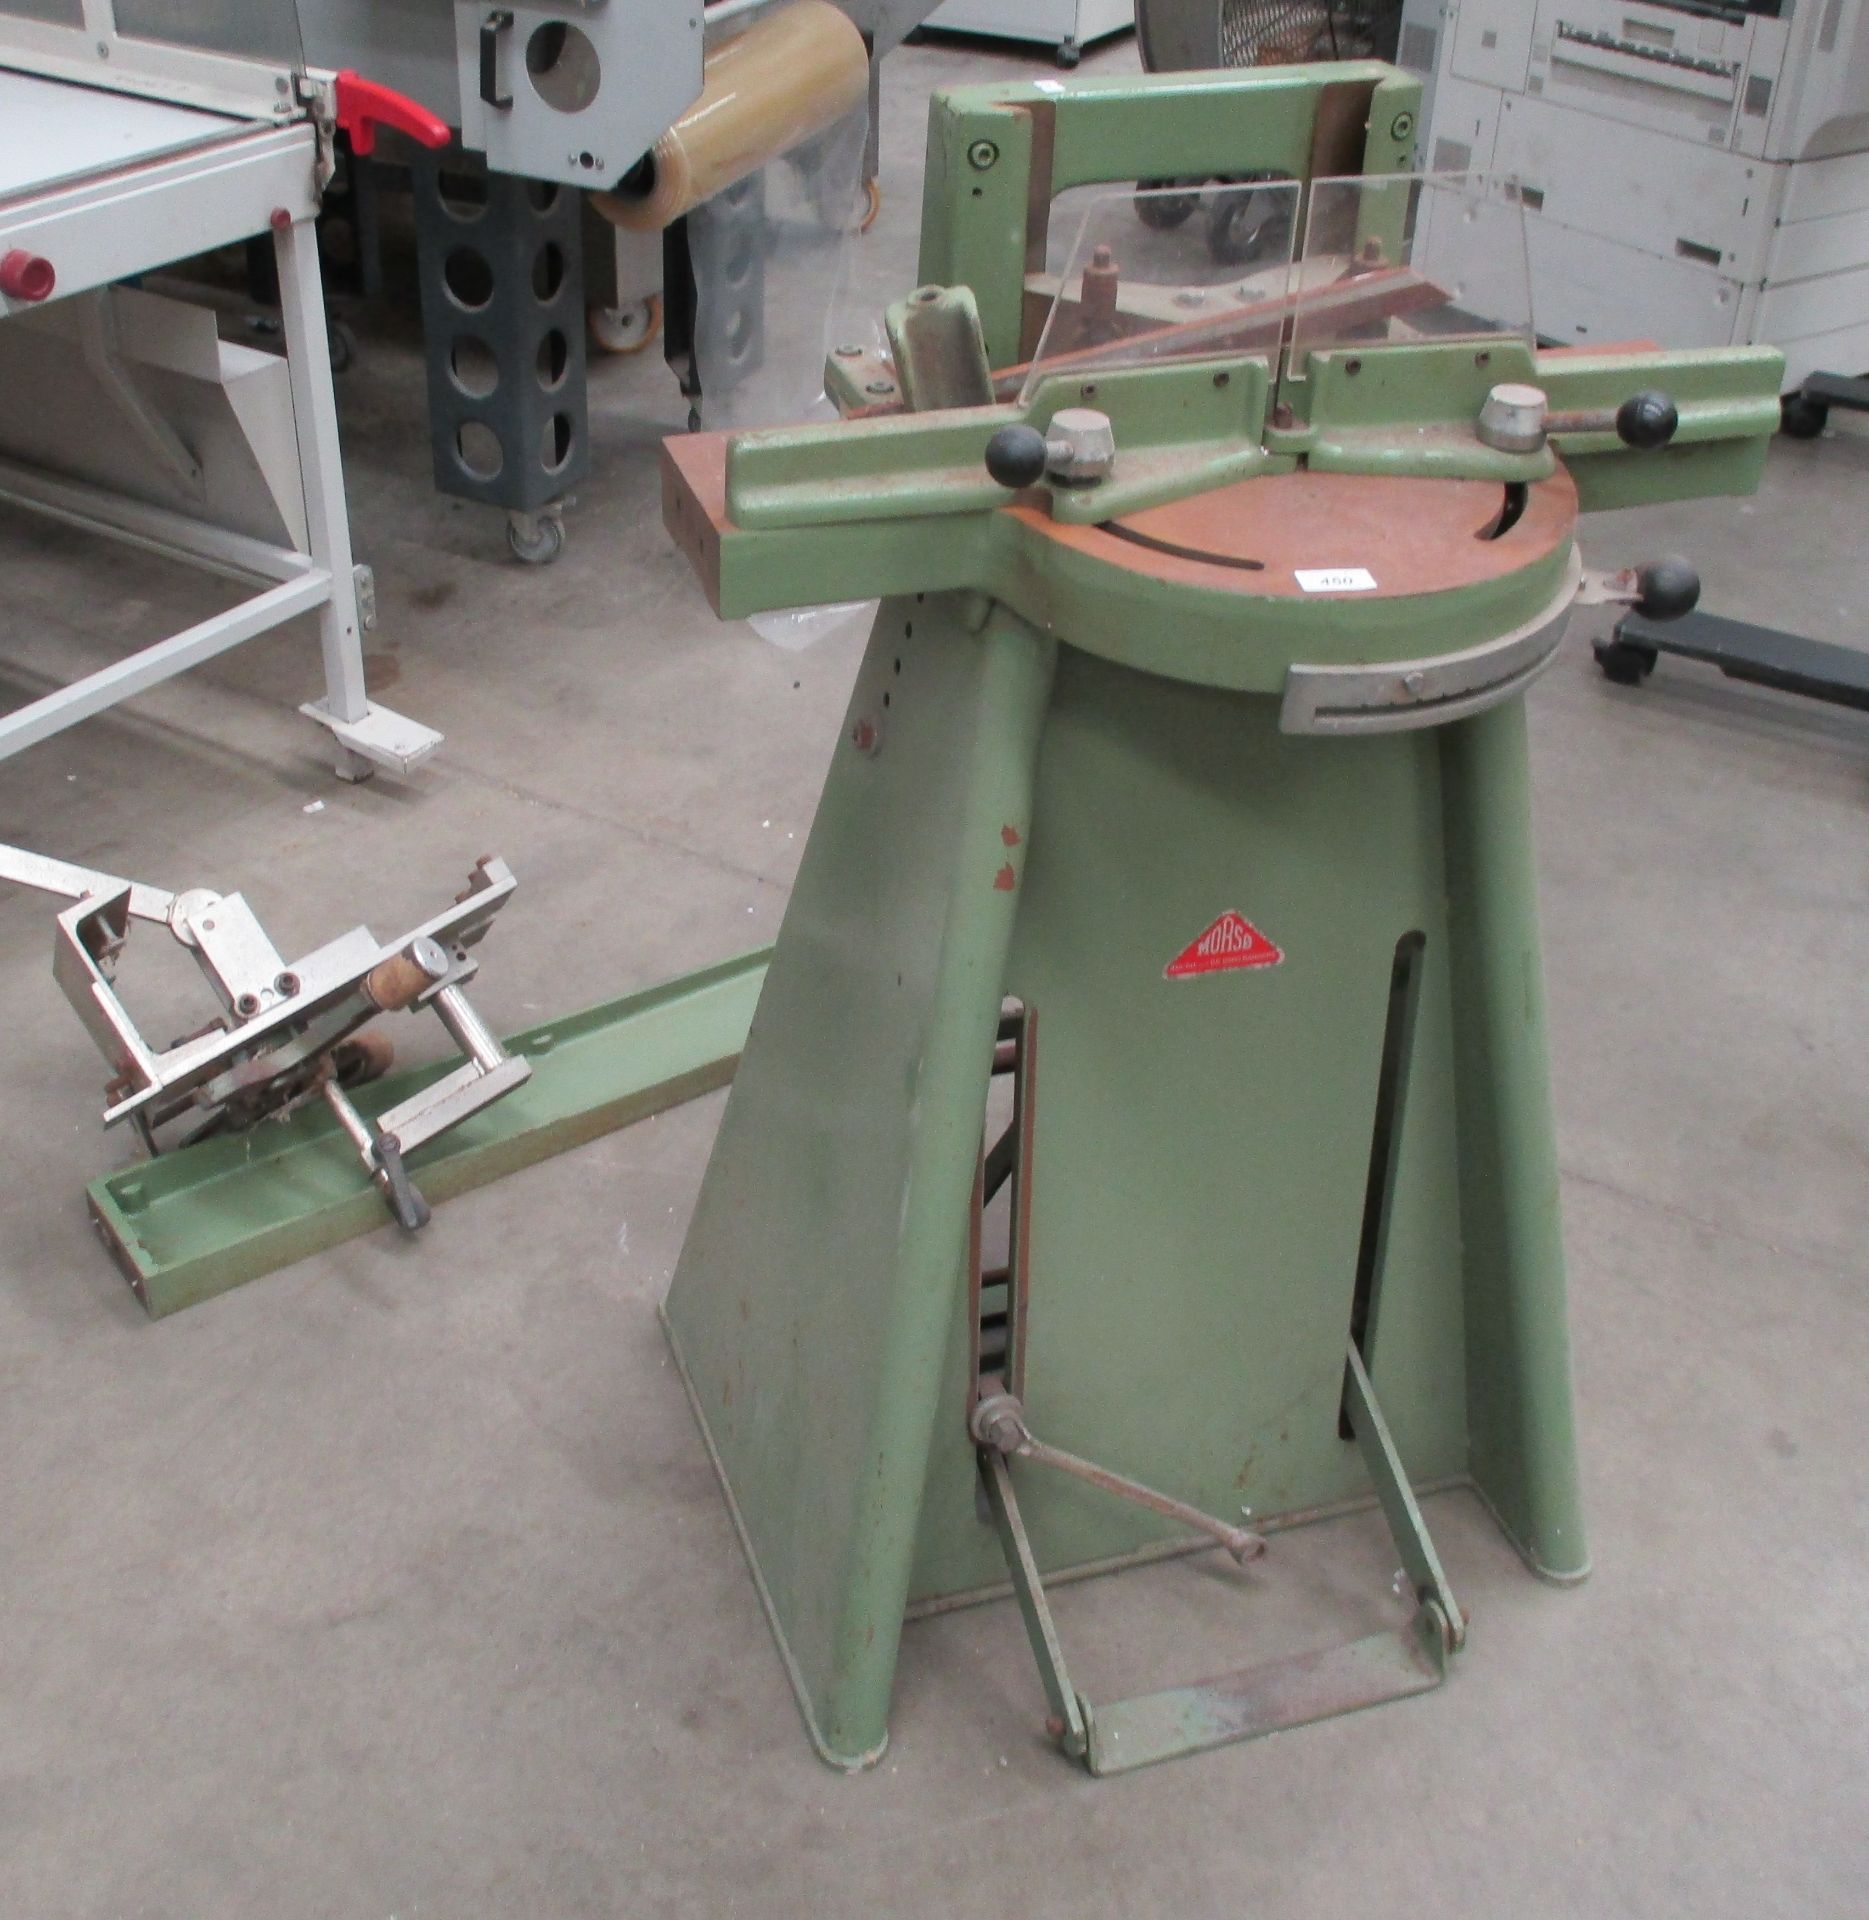 A Morso foot operated Mitre cutting machine complete with attachment and feed table